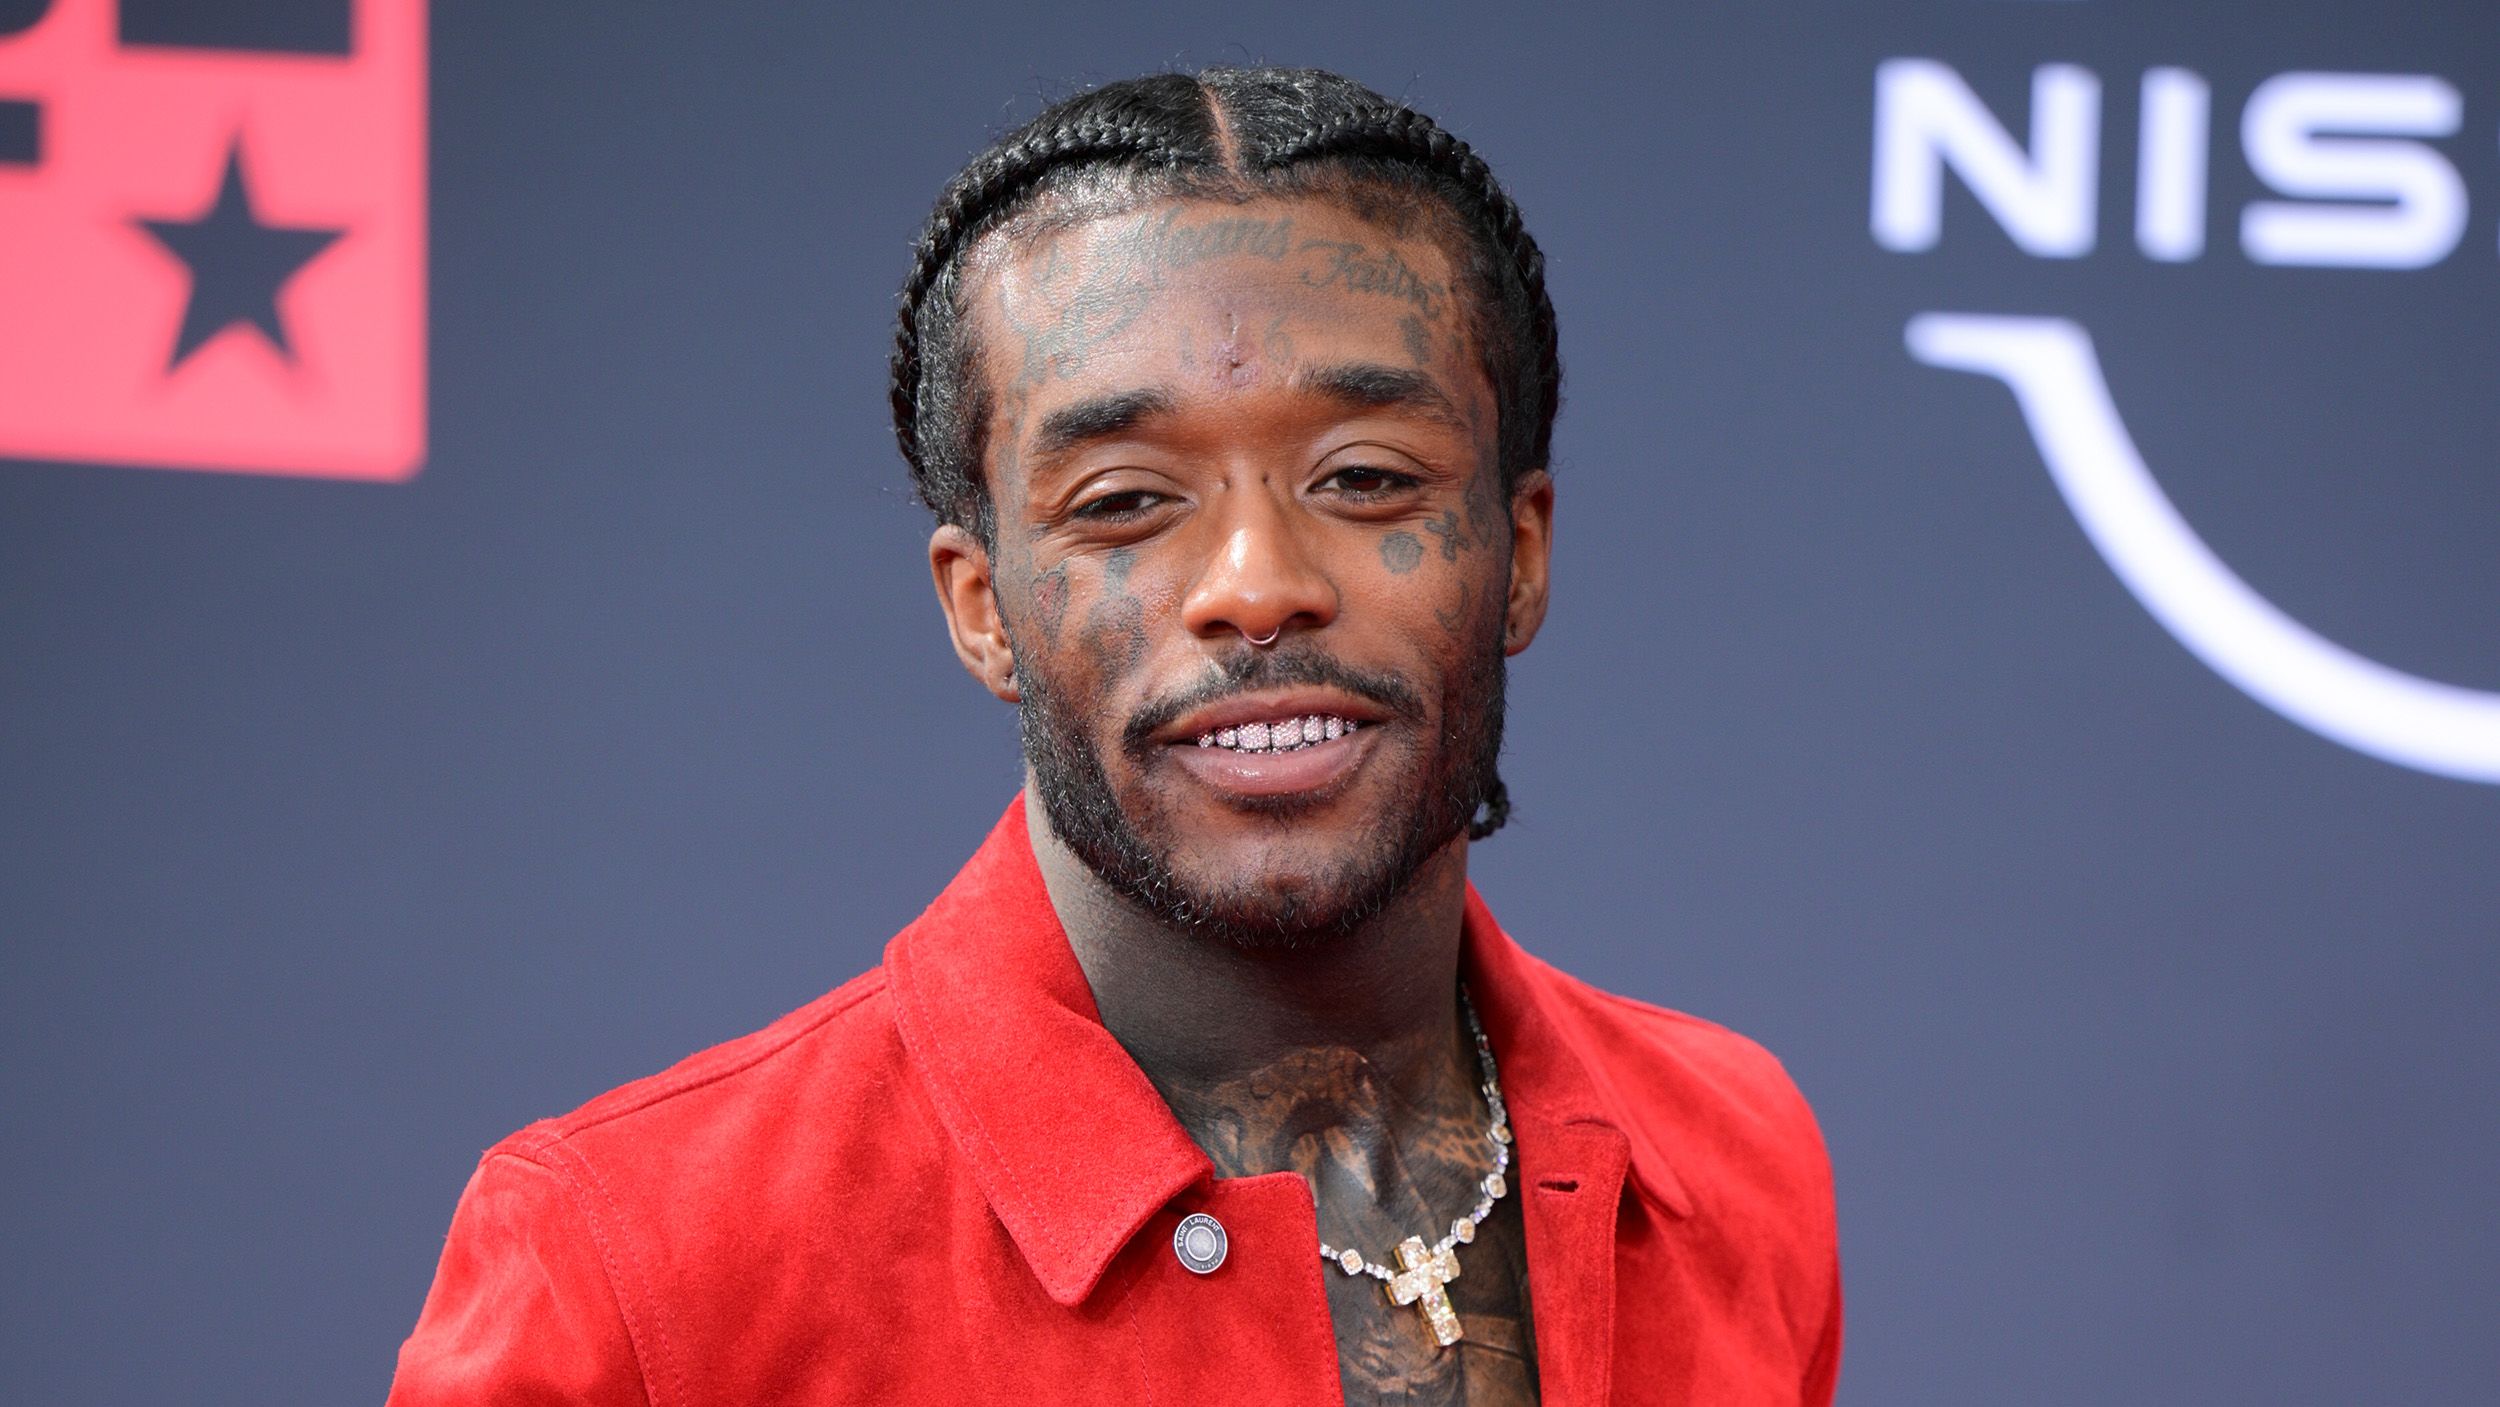 Lil Uzi Vert, born Symere Woods, is an American rapper, singer, and songwriter known for his unique style and high-energy performances. He has quickly become one of the most popular and influential artists in the world of hip-hop, with a dedicated fan base and multiple hit songs.